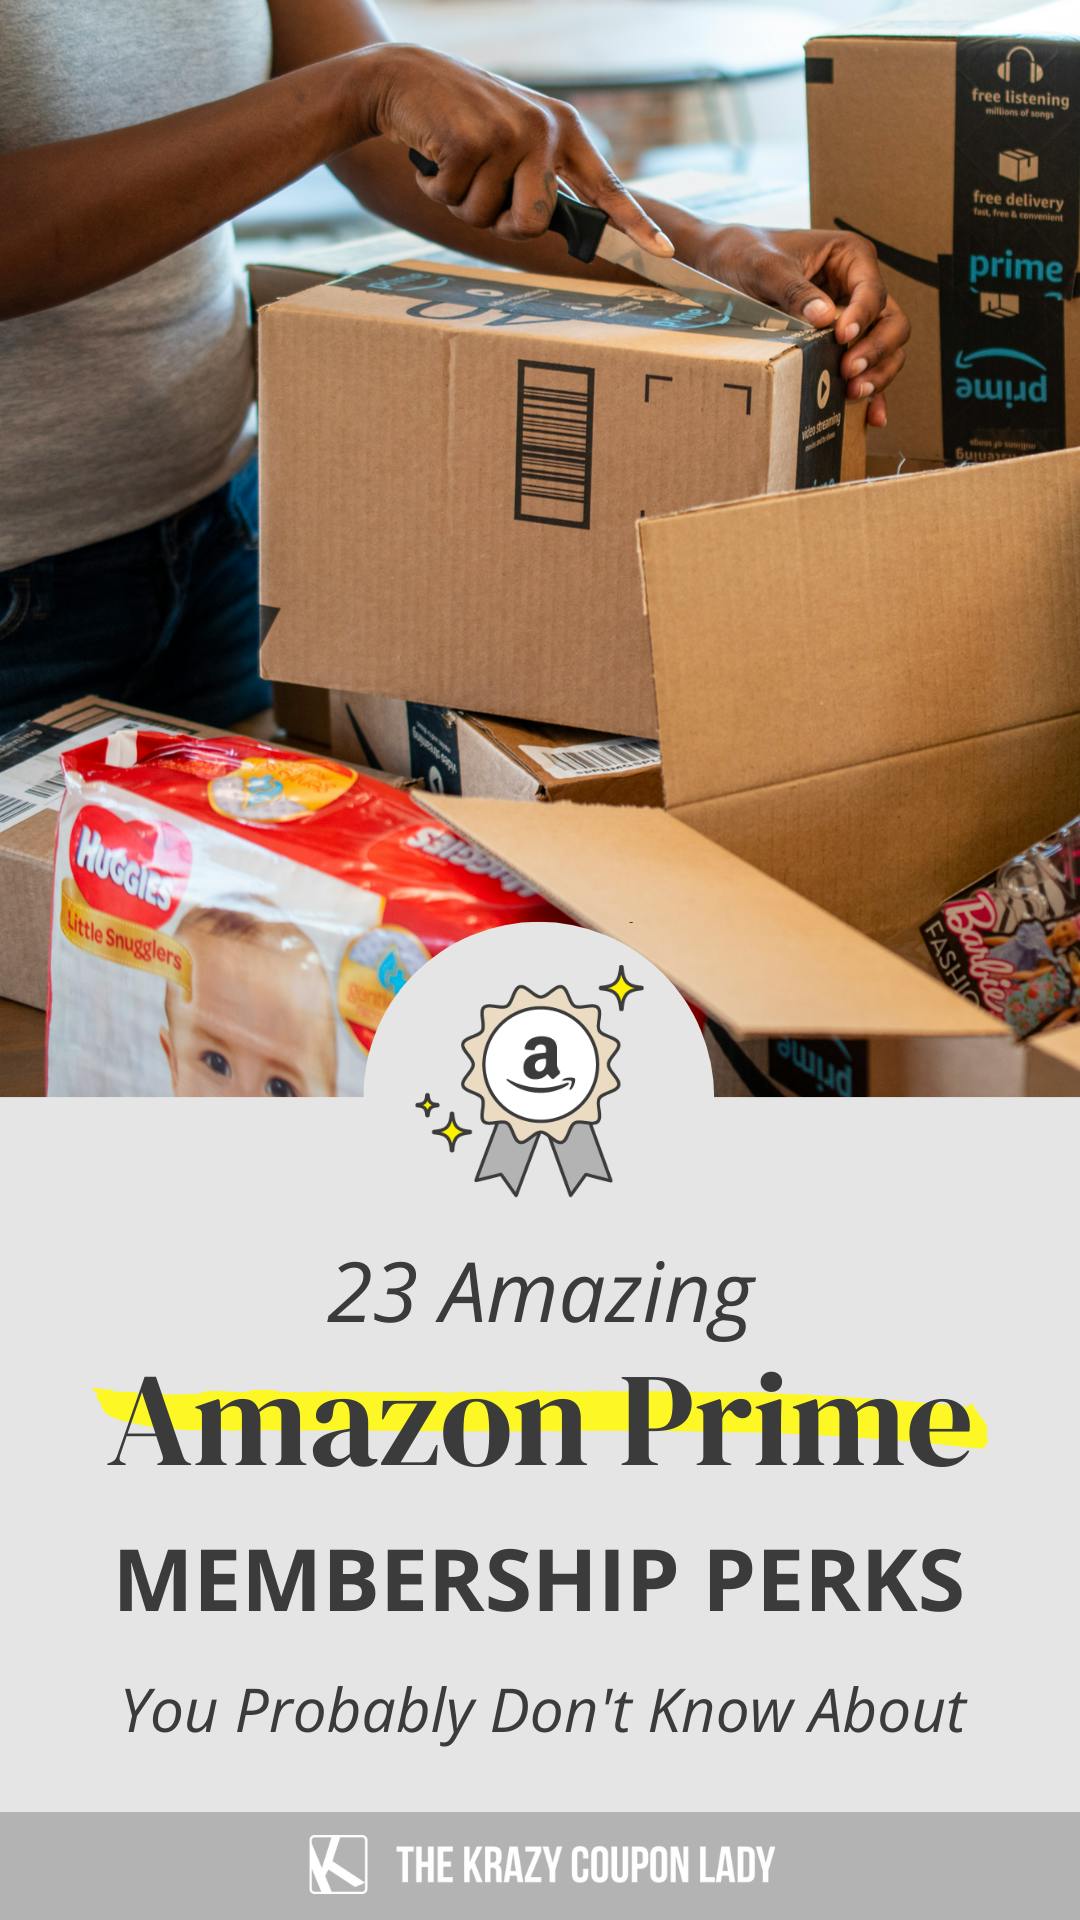 24 Amazon Prime Membership Perks You Probably Don't Know About